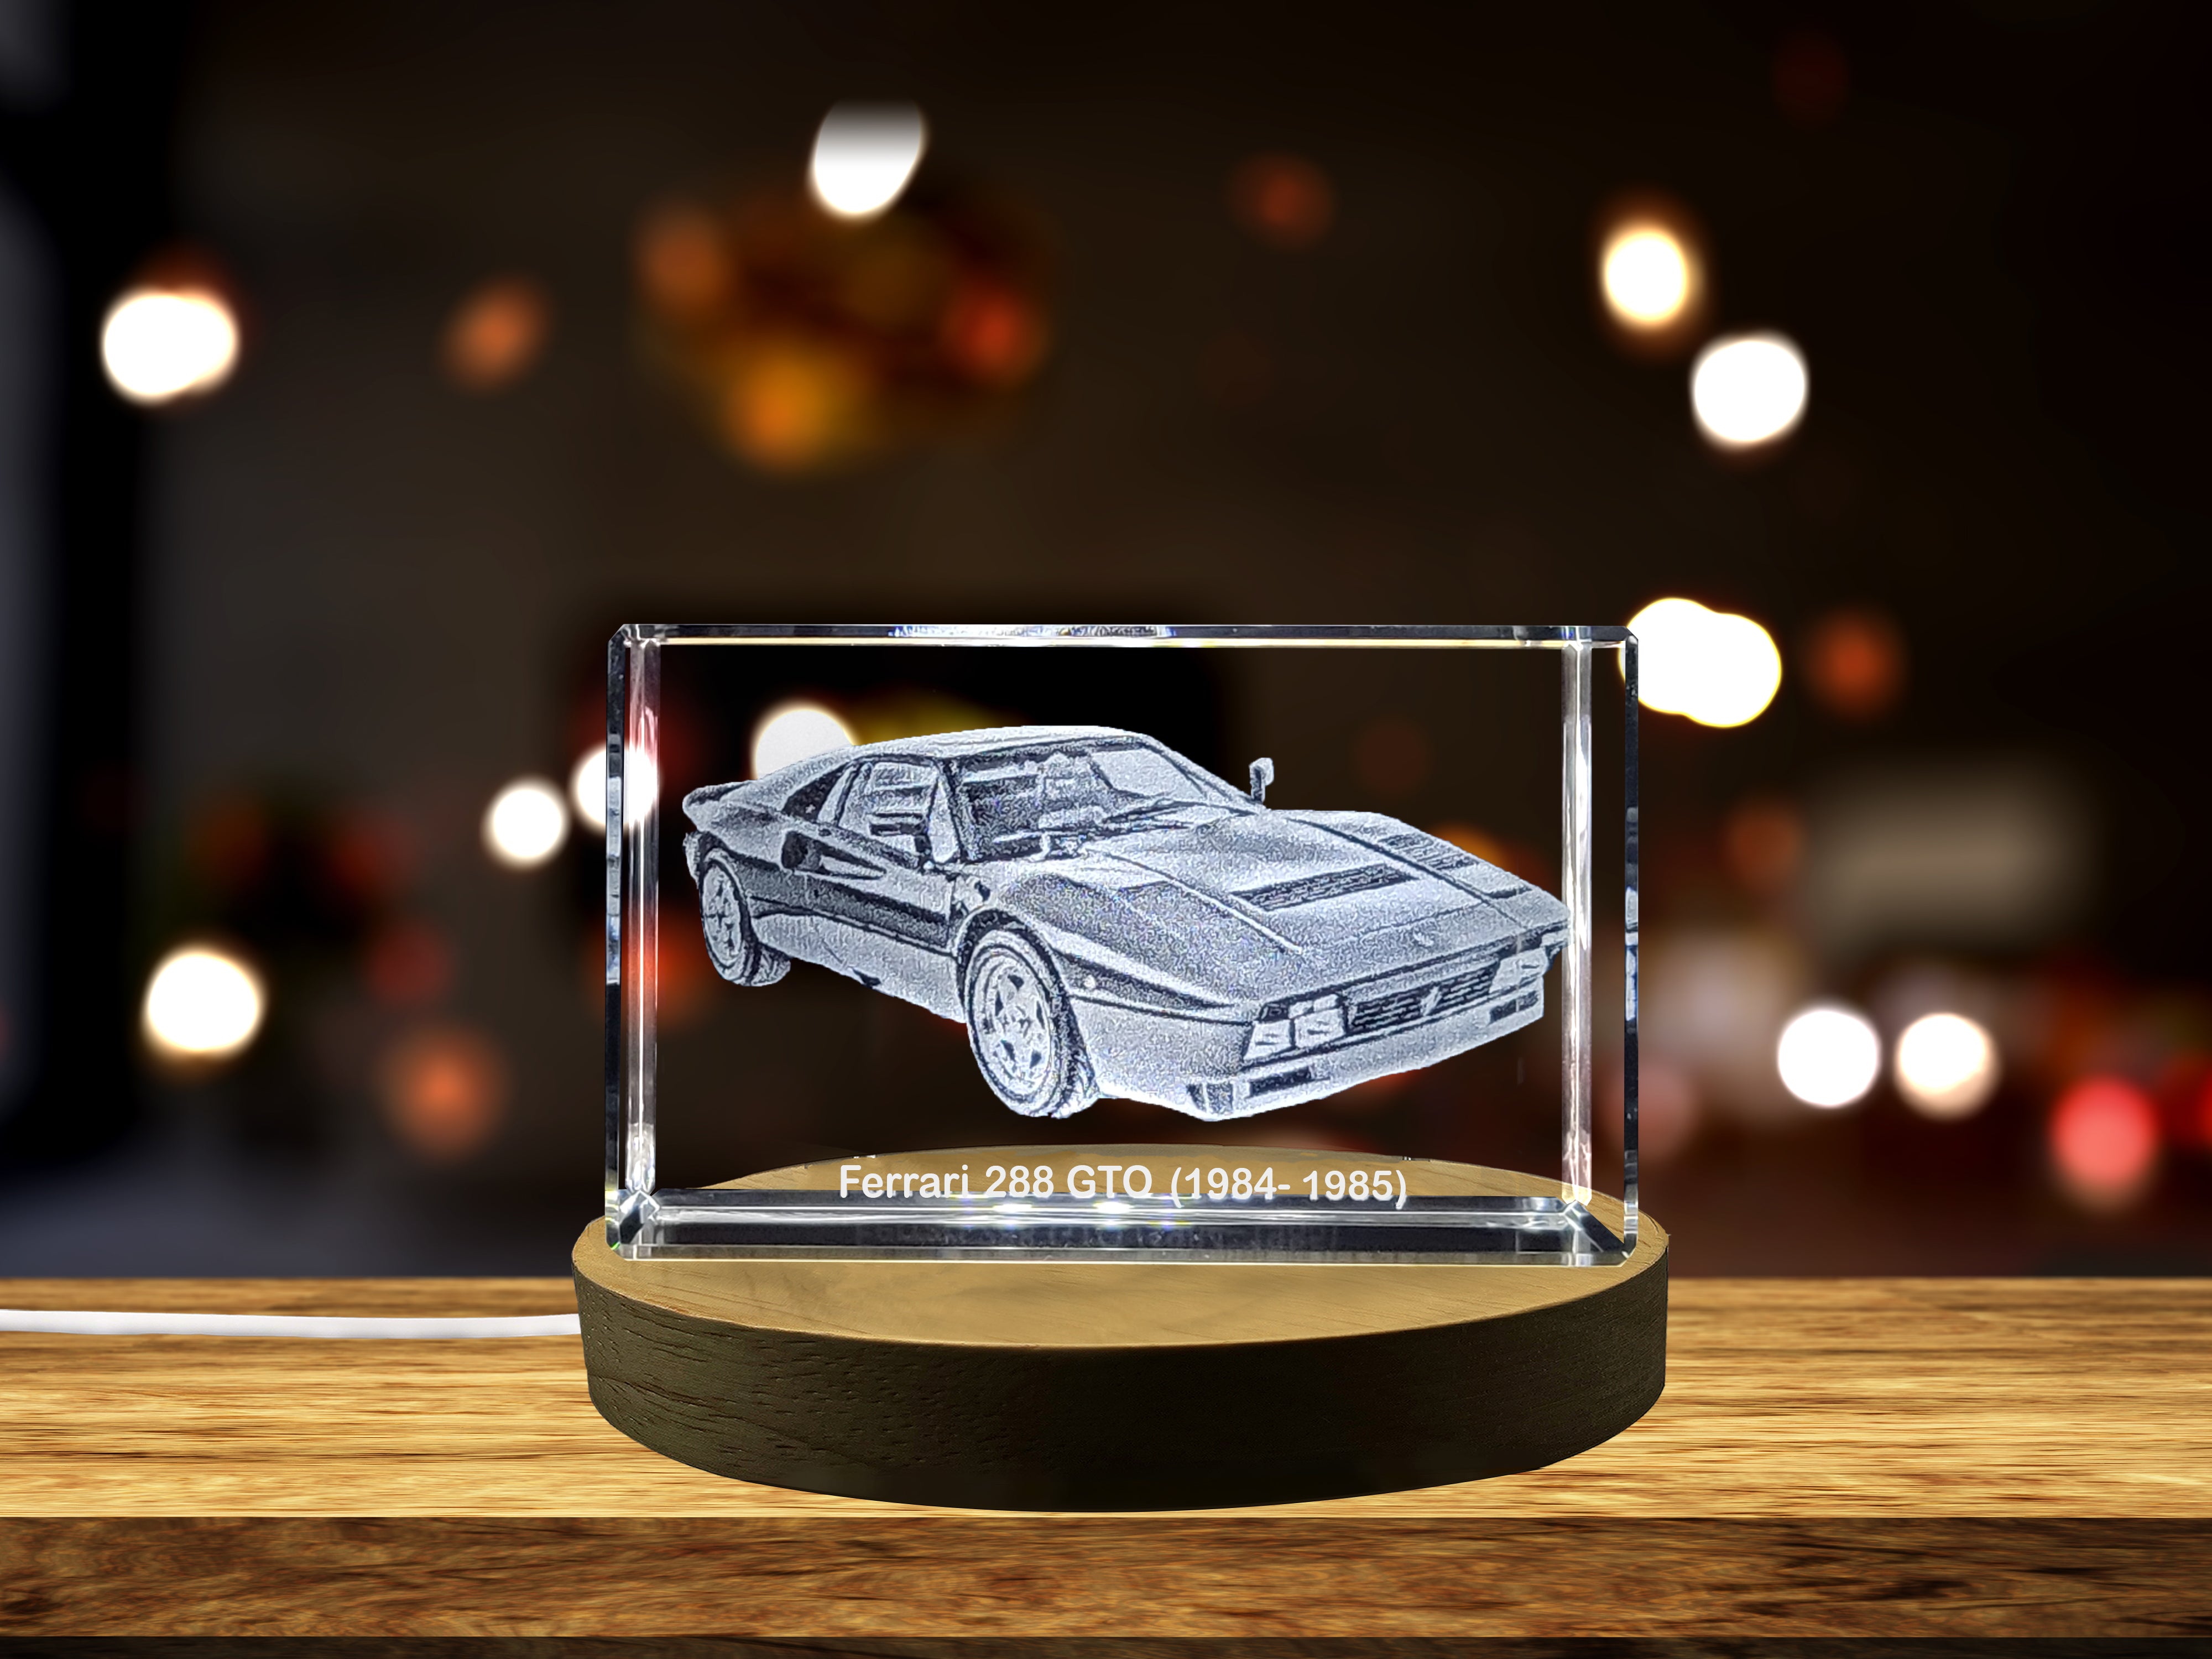 Ferrari 288 GTO Iconic Supercar Collectible Crystal Sculpture | Rare 1984-1985 Mid-Engine Masterpiece A&B Crystal Collection